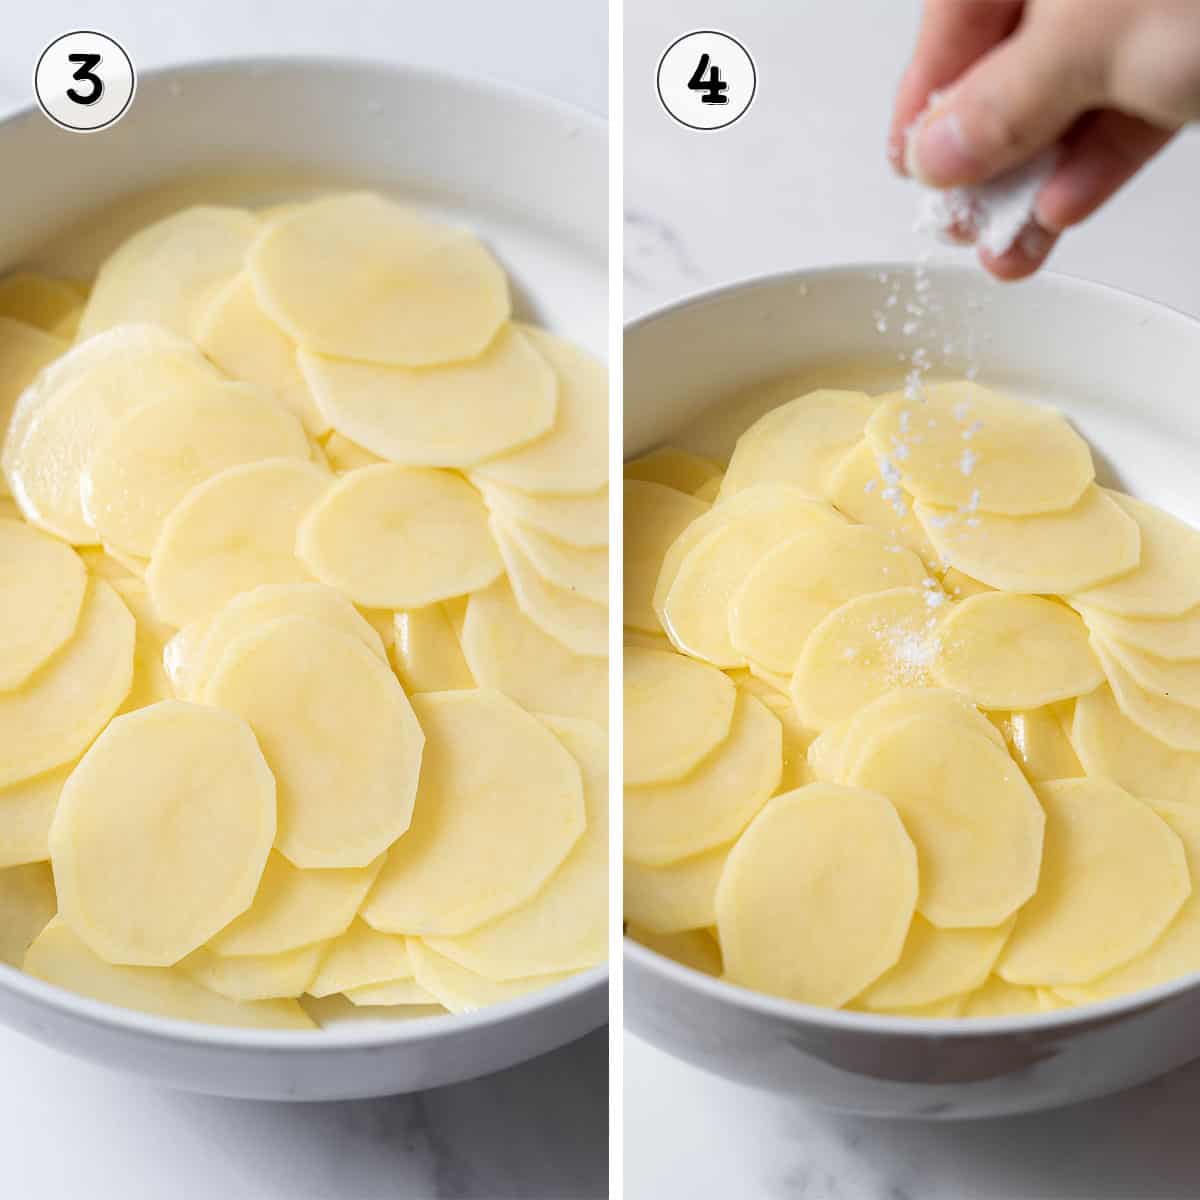 patting the sliced potatoes dry and sprinkling with salt.